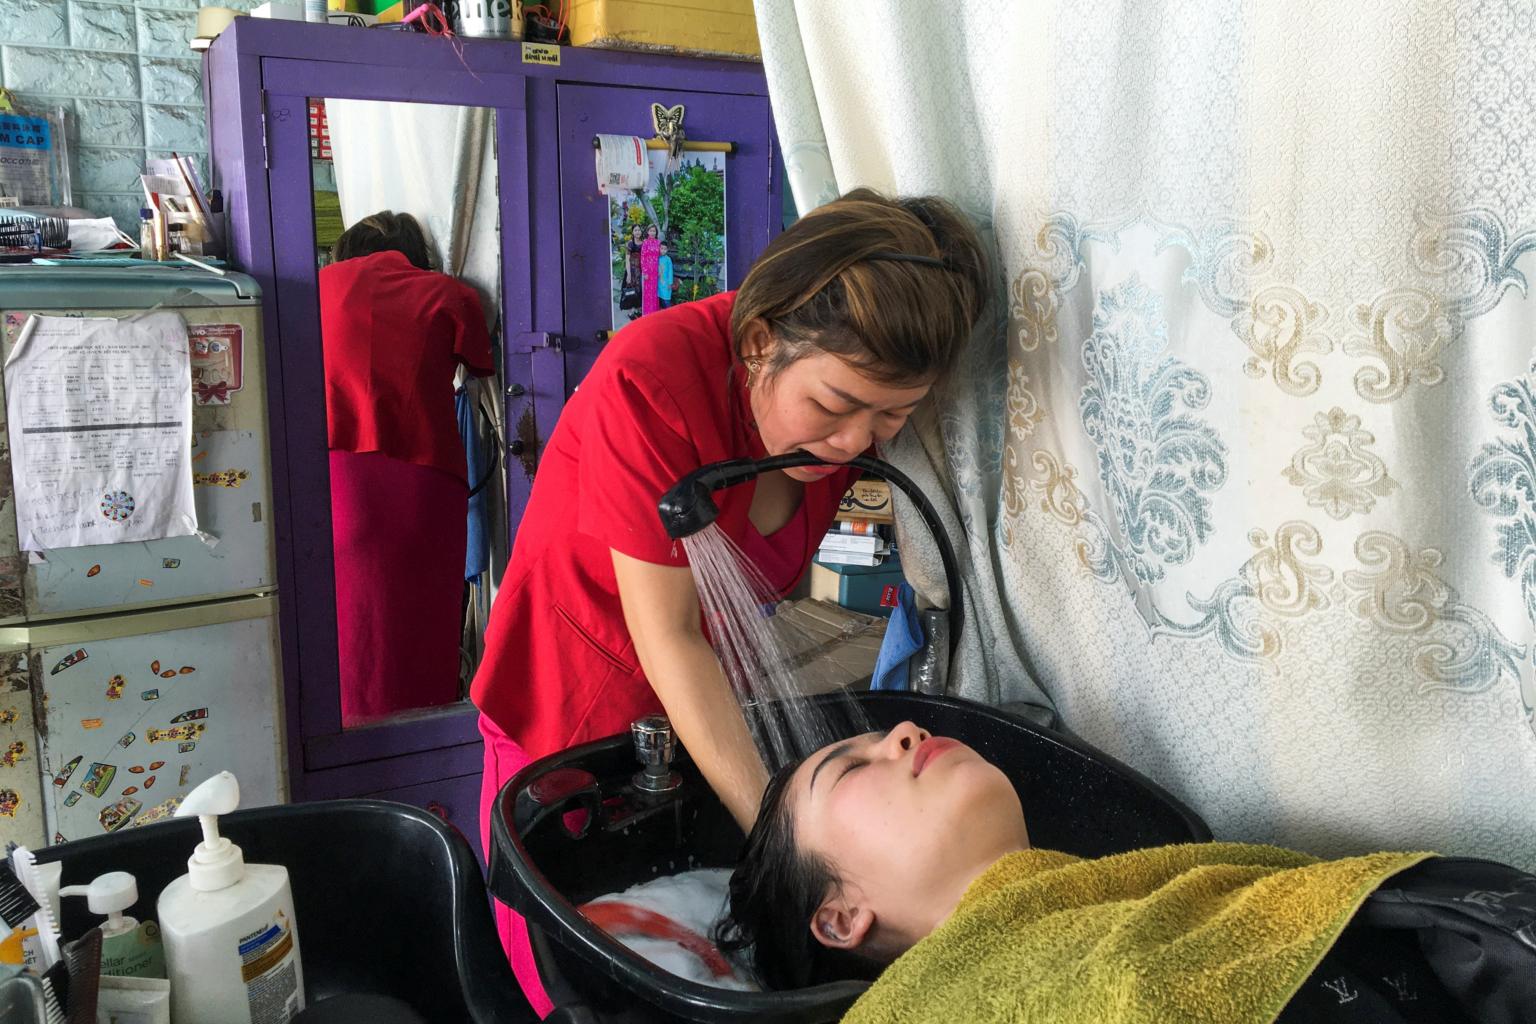 Le Thi Kim Tram holds the shower head in her mouth when washing clients' hair. Photo: Reuters